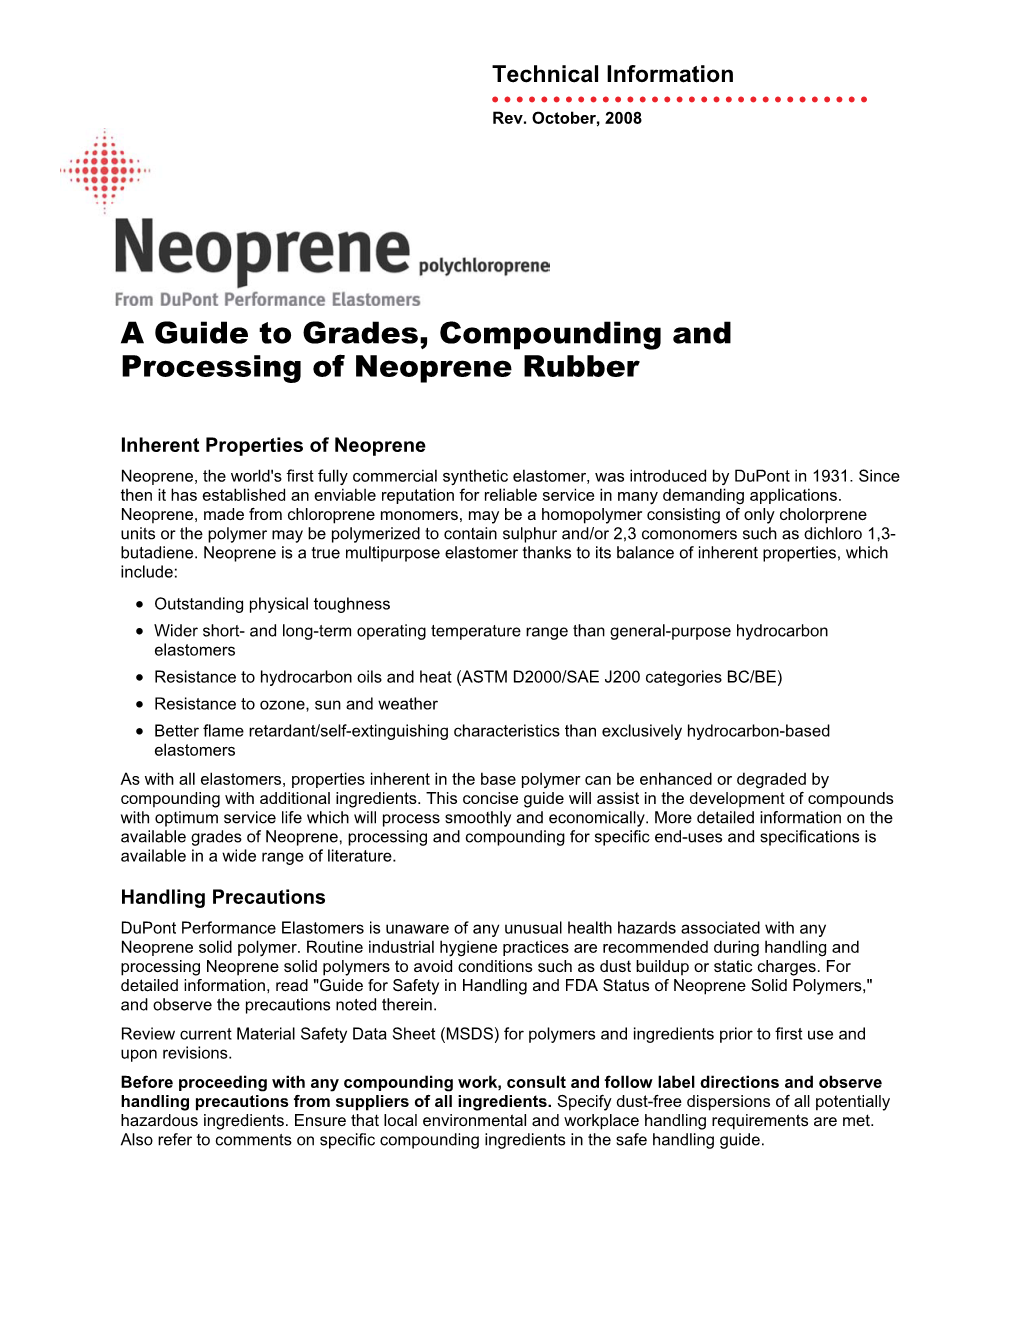 A Guide to Grades, Compounding and Processing of Neoprene Rubber